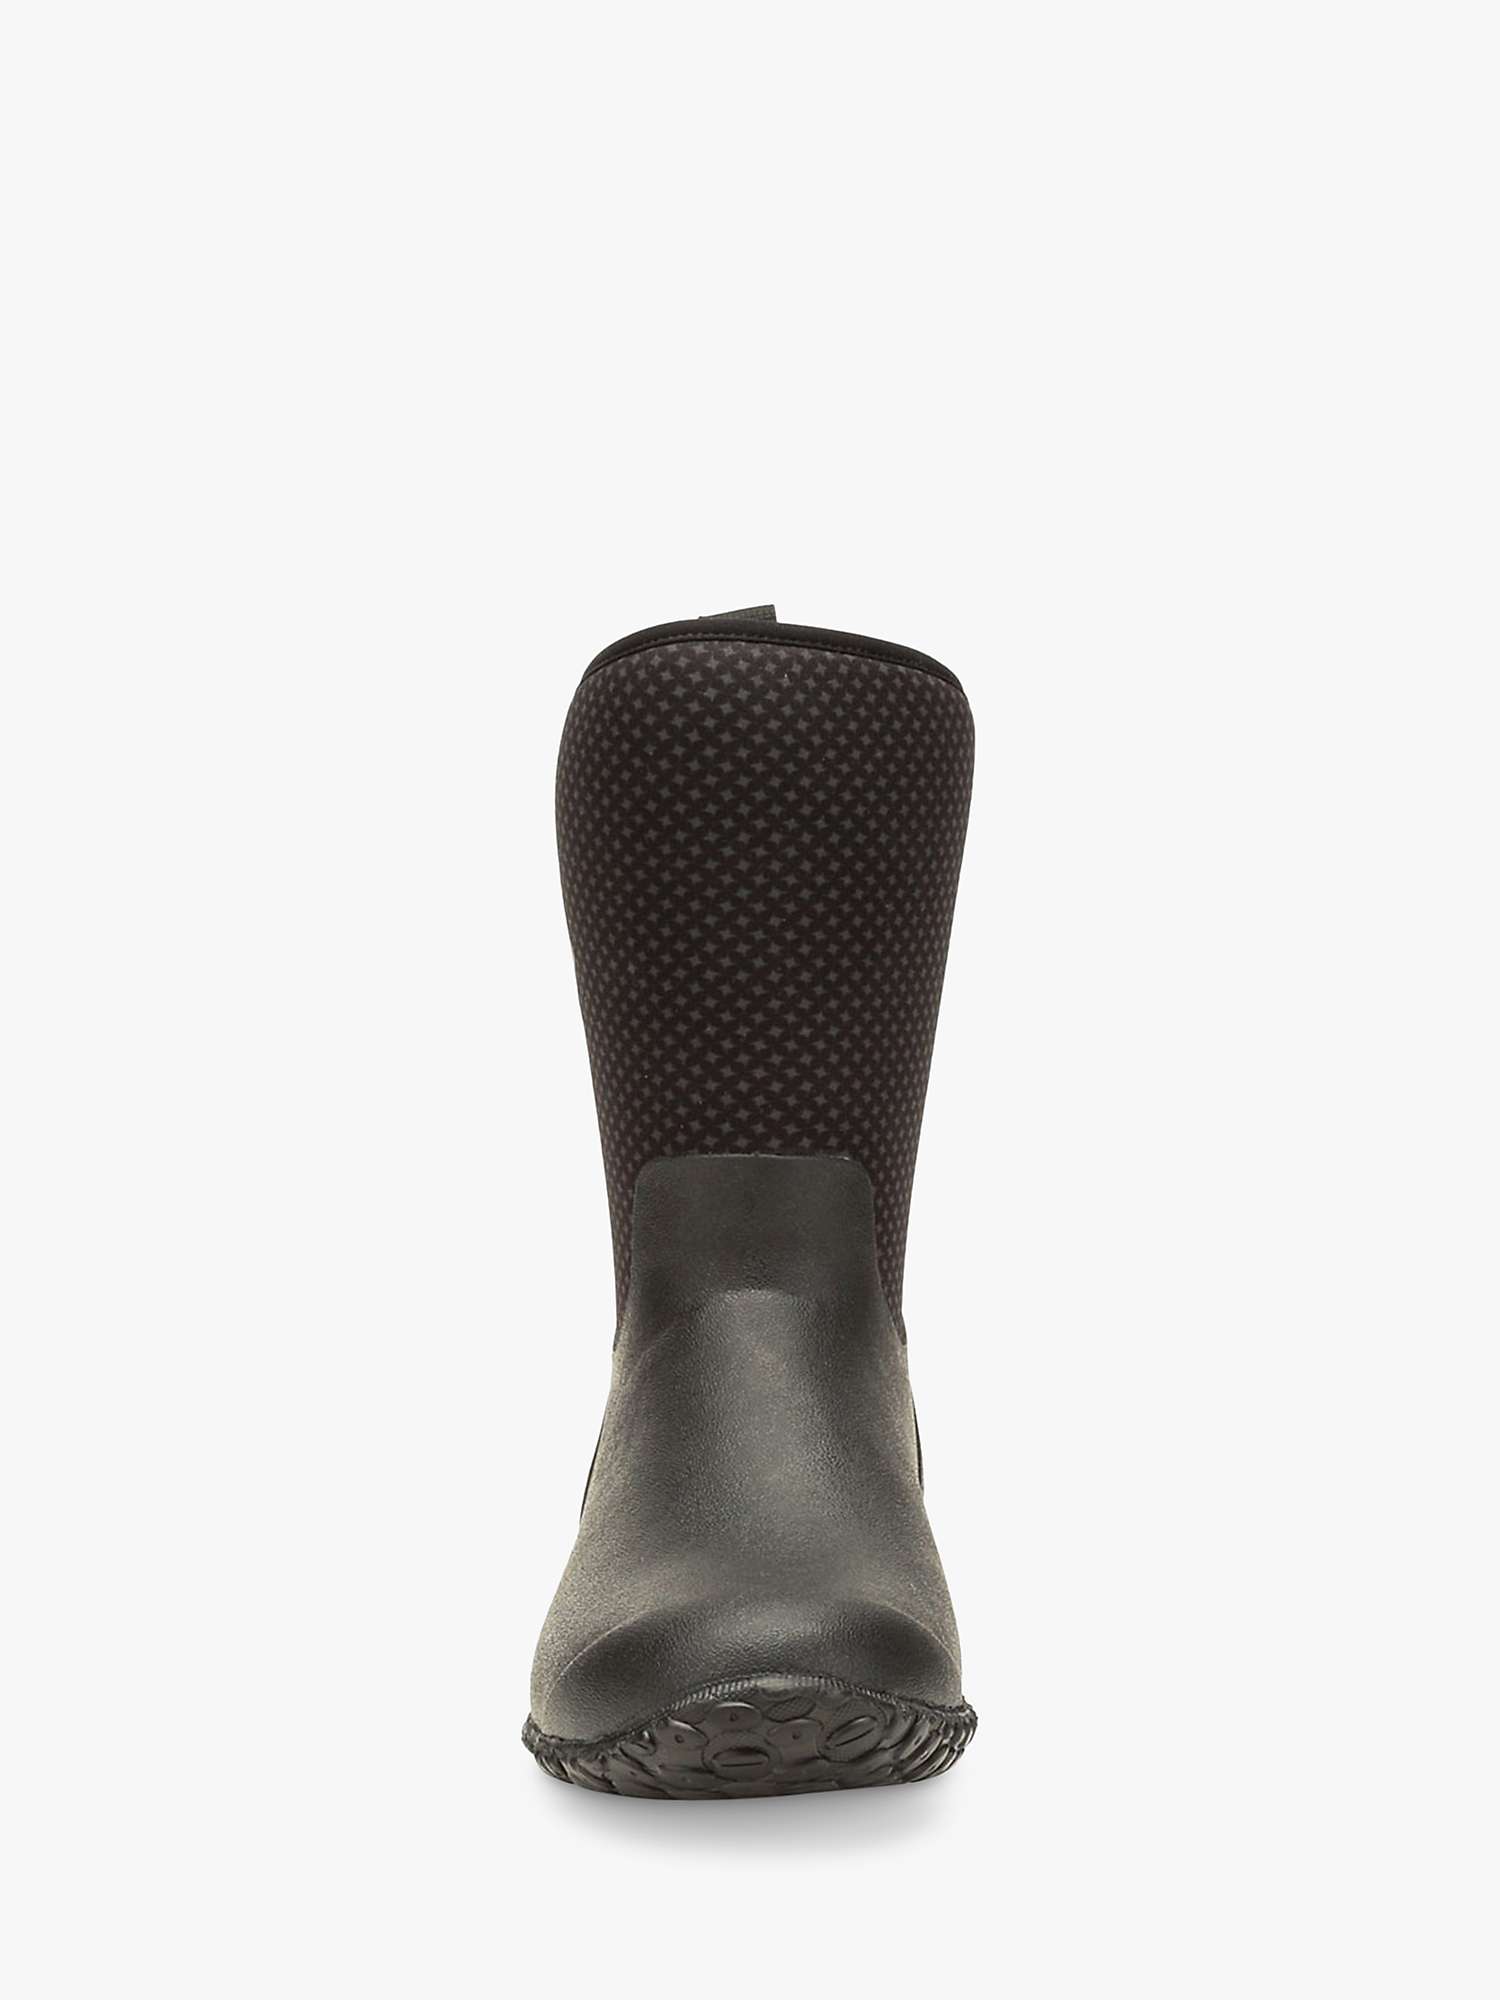 Buy Muck RHS Muckster II Mid Wellington Boots, Charcoal Online at johnlewis.com